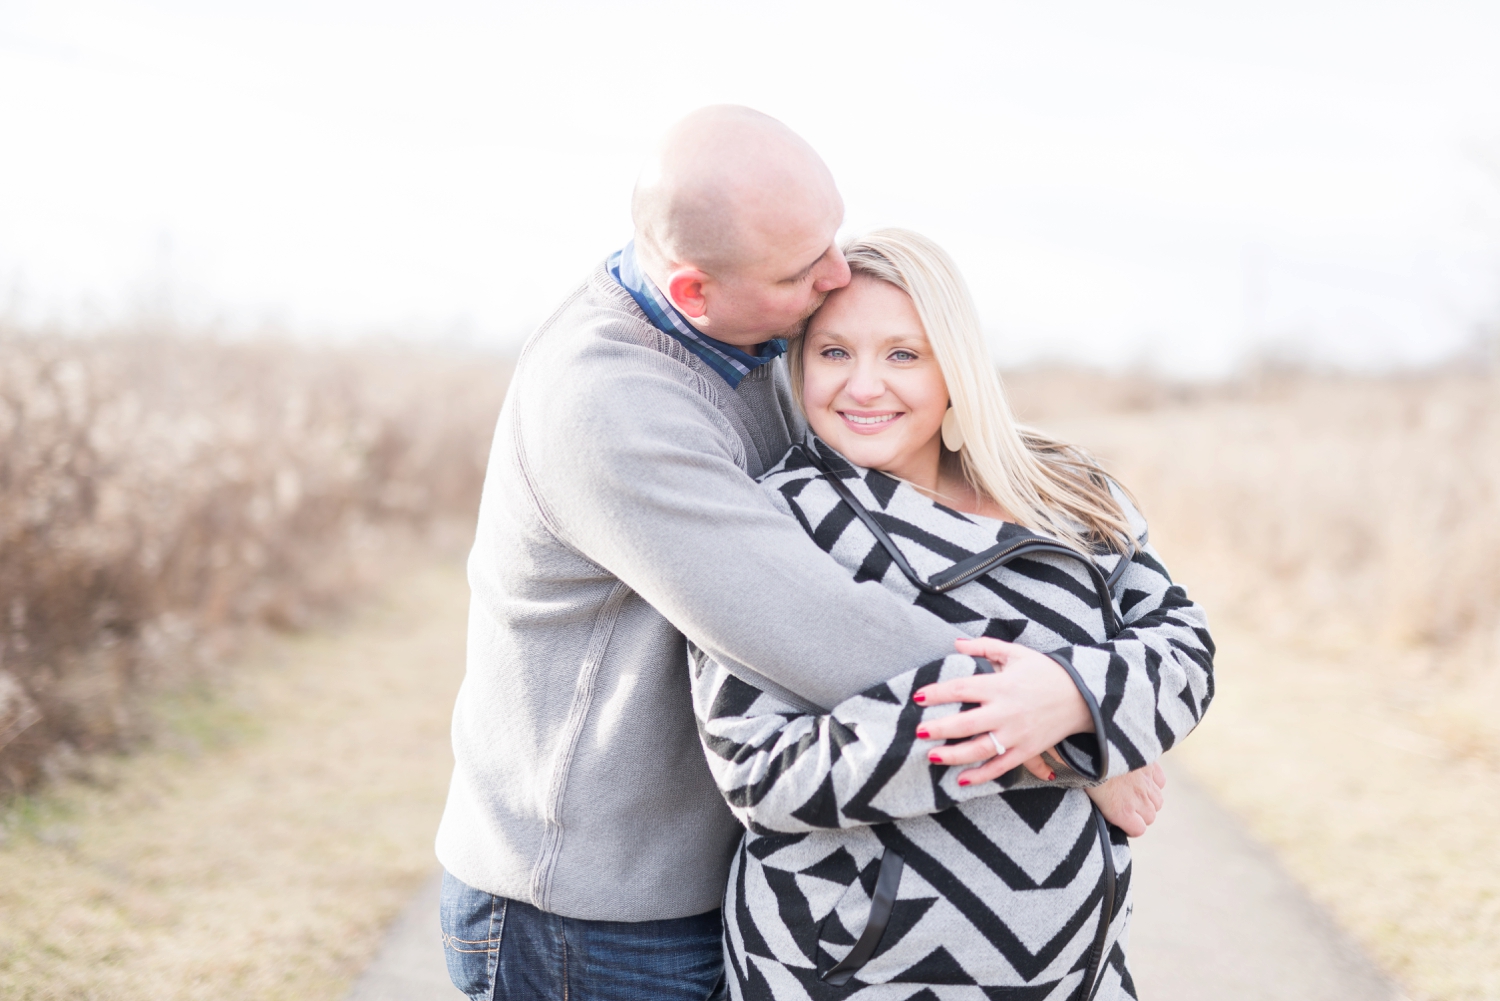 winter-engaged-couple-at-their-photo-session-at-the-scioto-audubon-park-near-grange-audubon-center-with-walkways-and-grass_0321